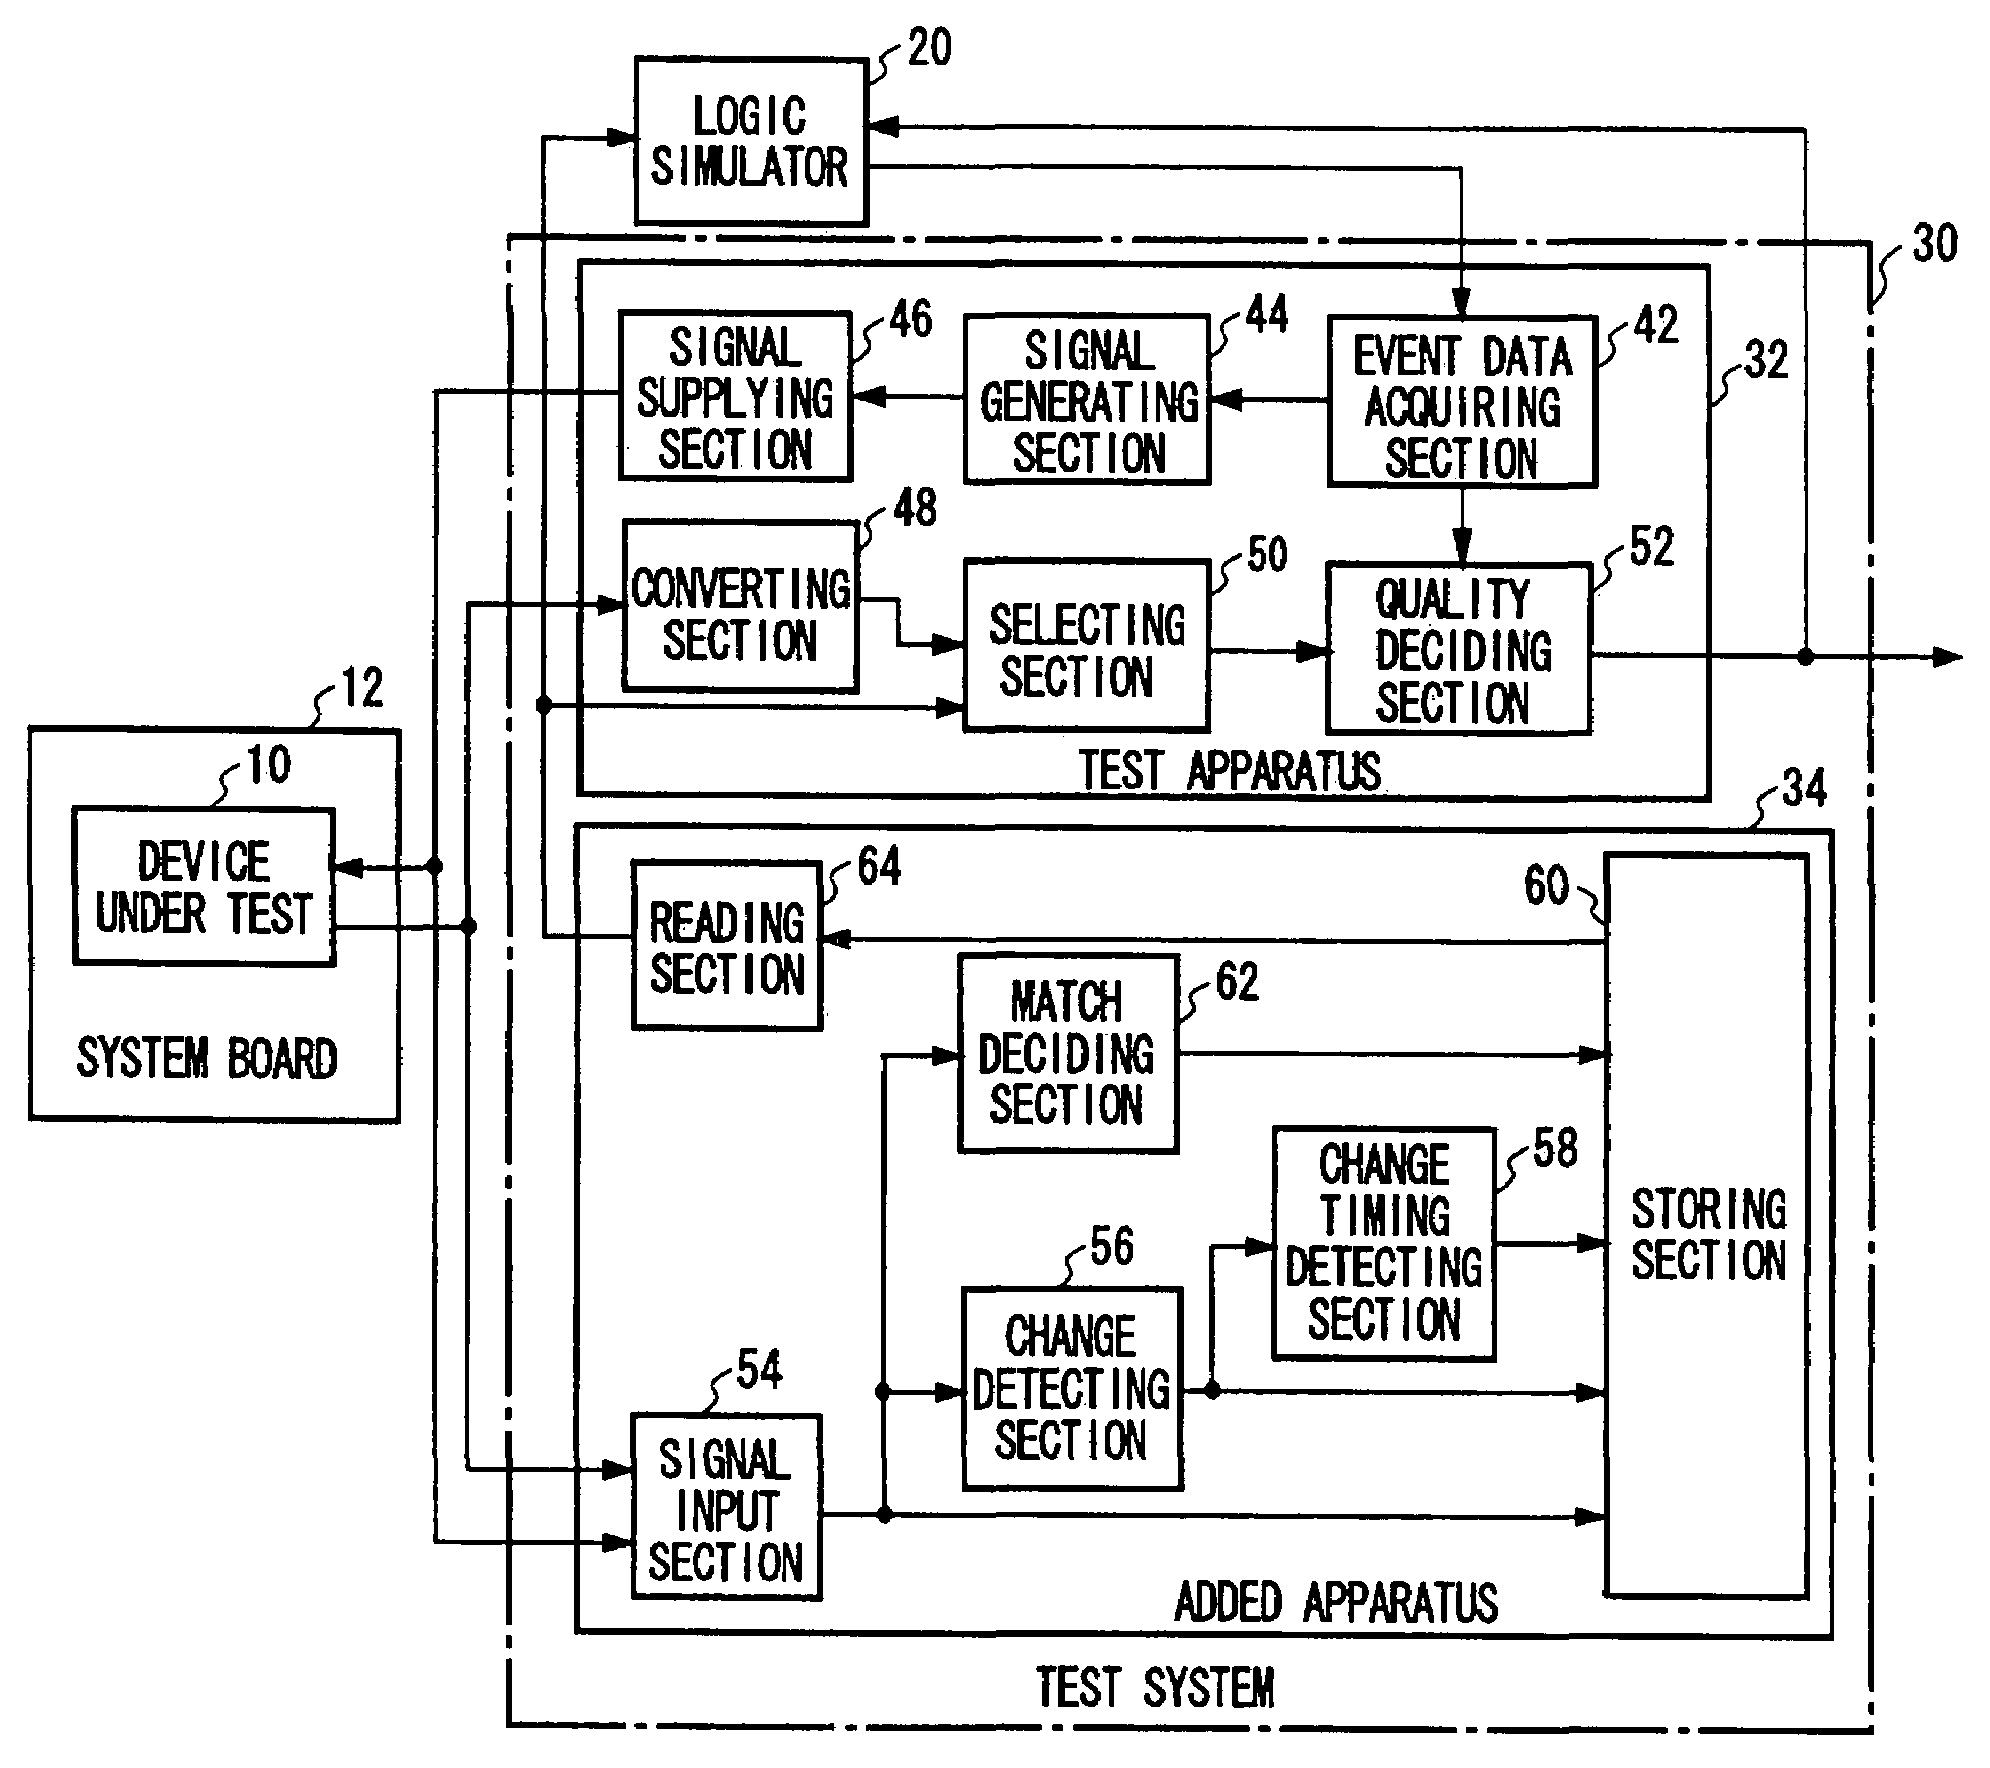 Test system, added apparatus, and test method